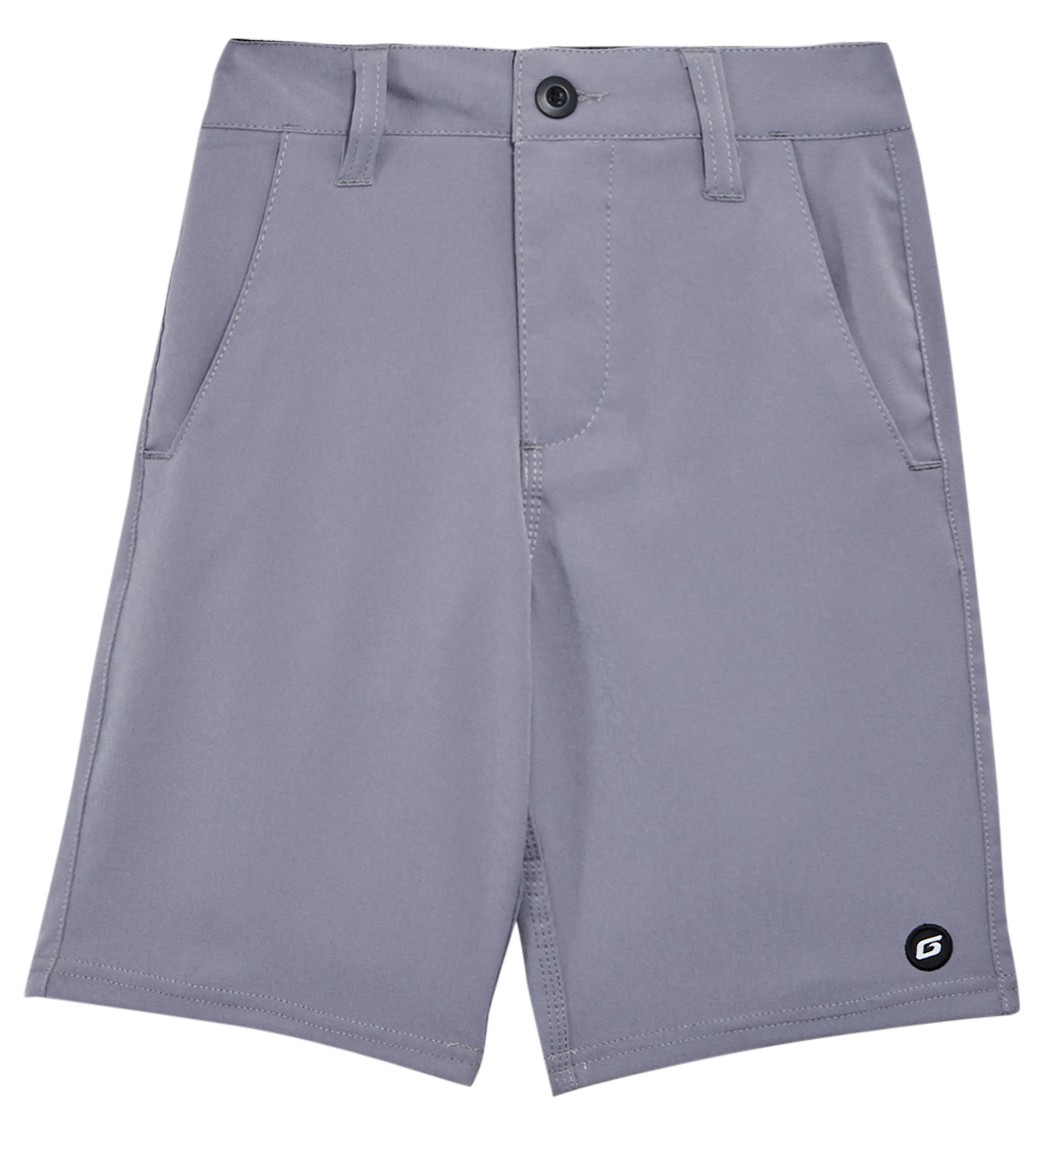 Grom Boys' Off Road Wet/Dry Short - Light Gray X-Small 4/5 Polyester/Cotton - Swimoutlet.com